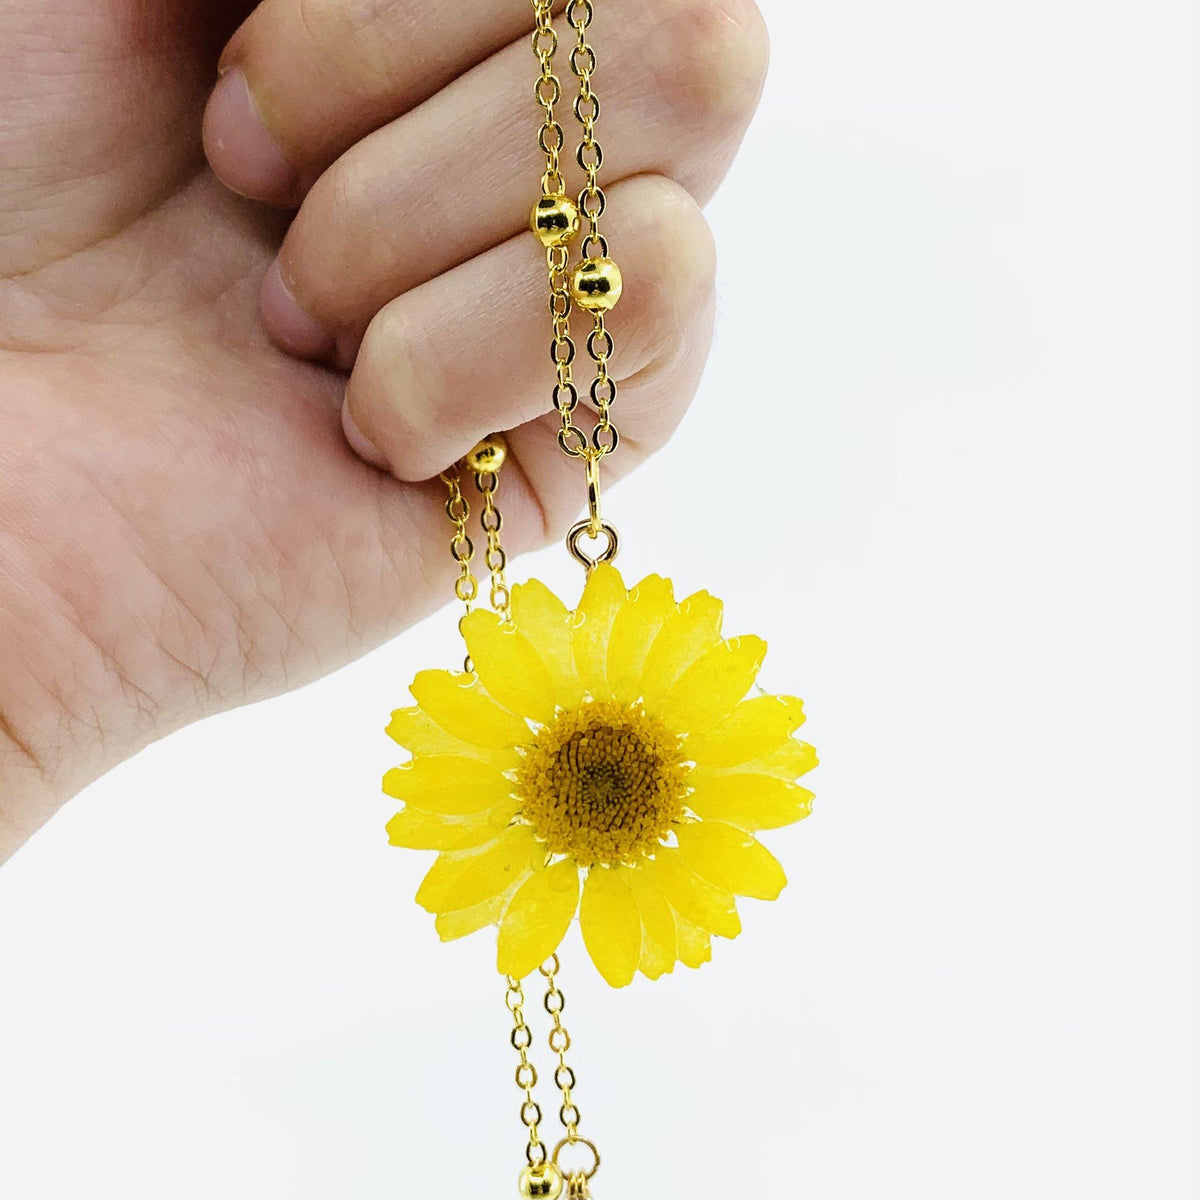 Pressed Flower Necklace Manufactured Overseas 